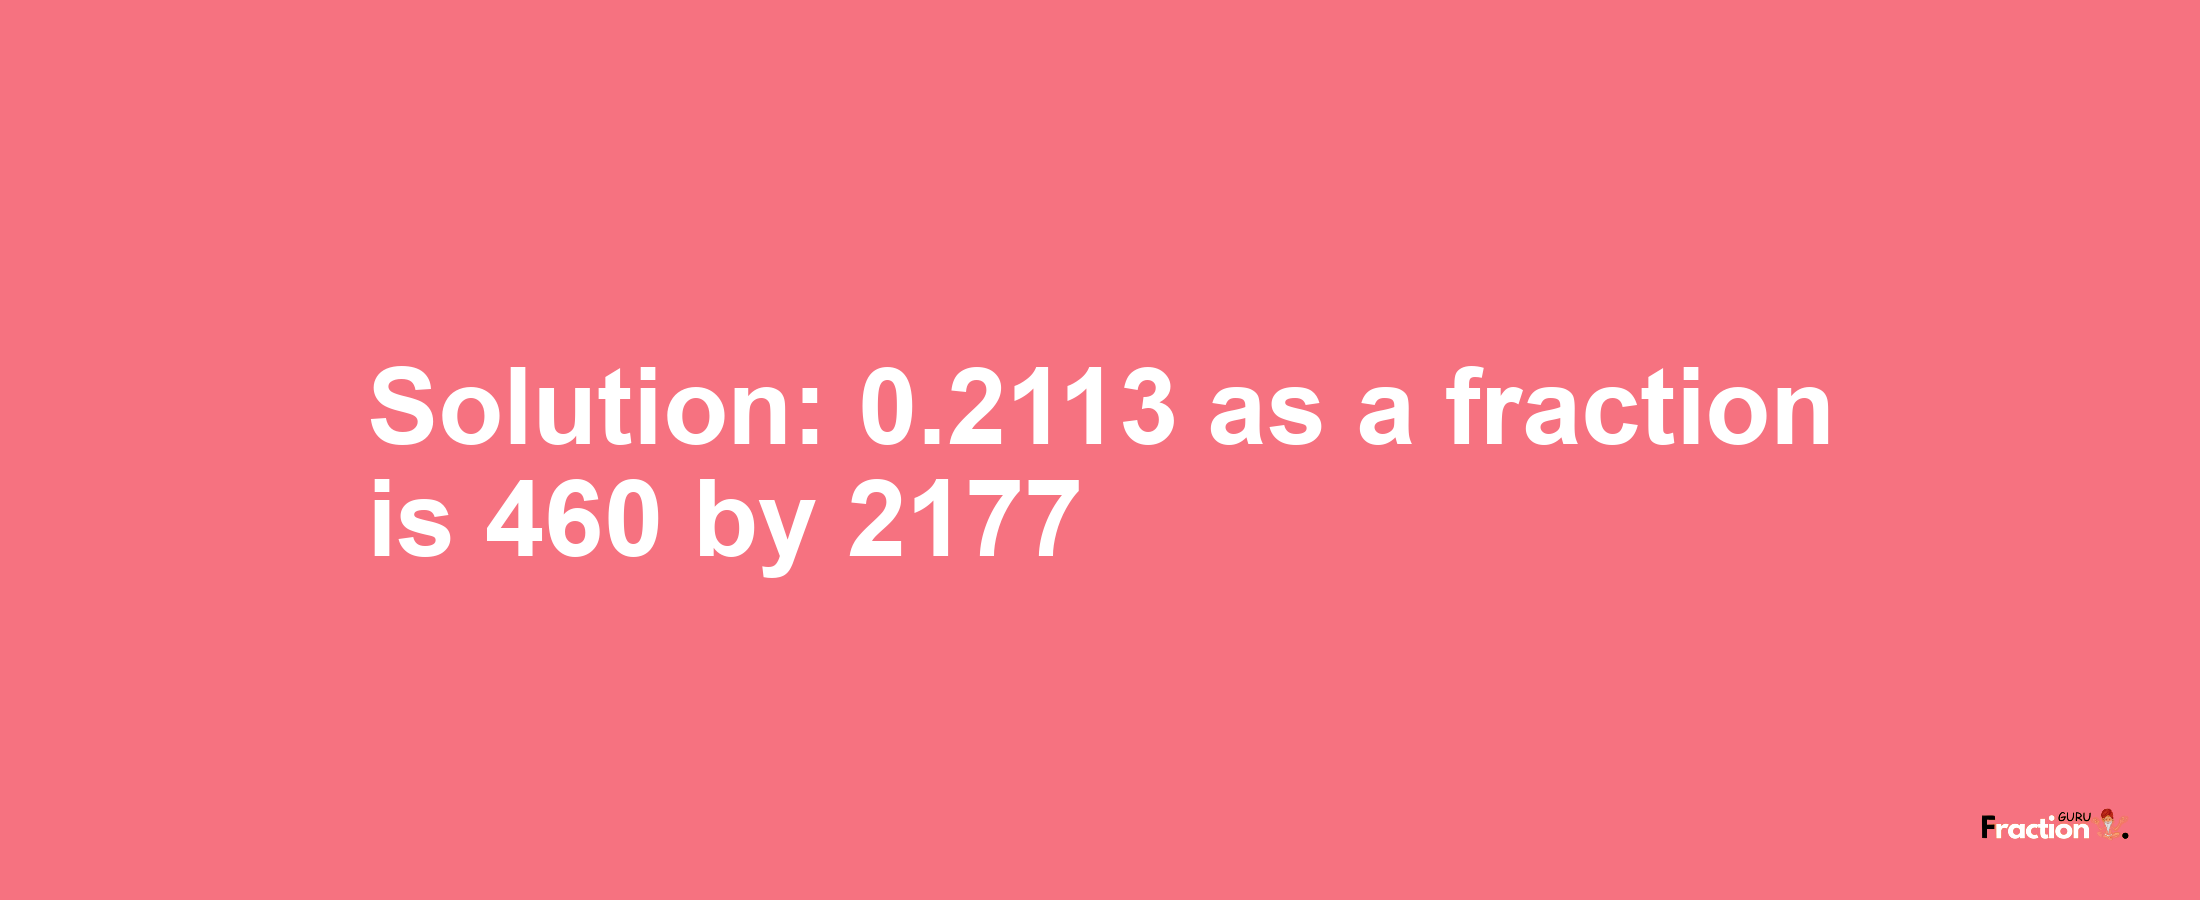 Solution:0.2113 as a fraction is 460/2177